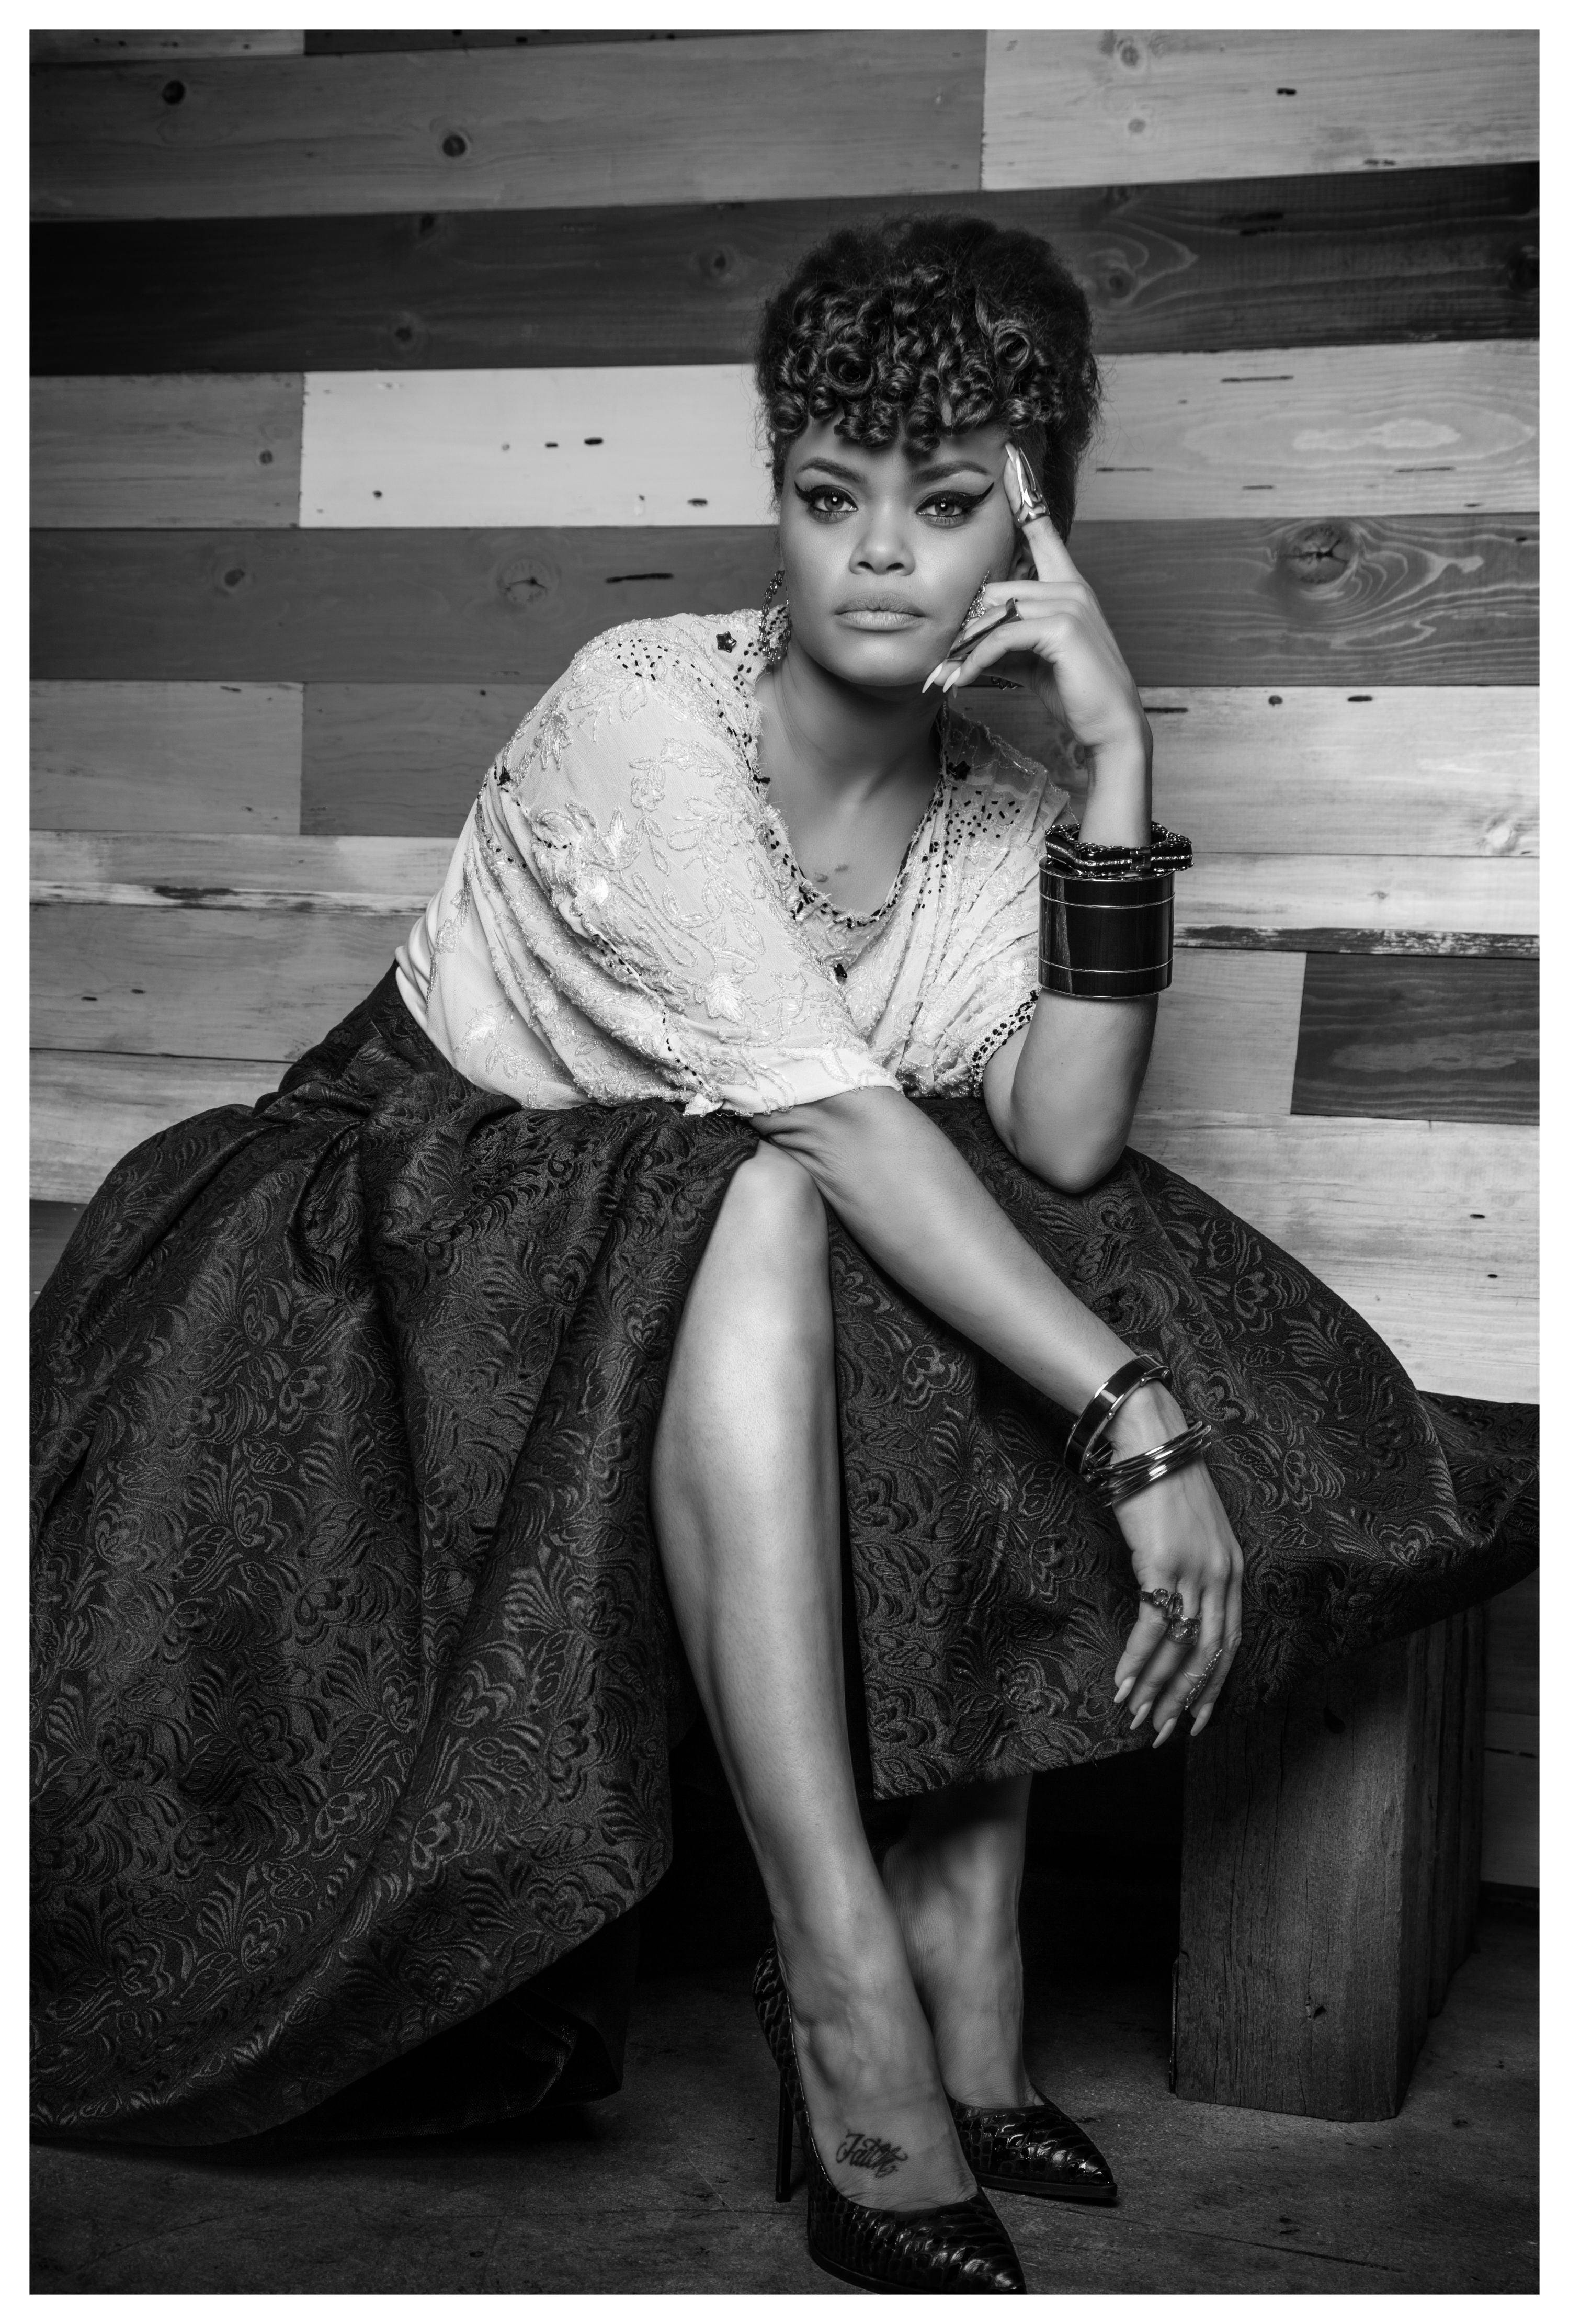 A Conversation With Andra Day at The GRAMMY Museum